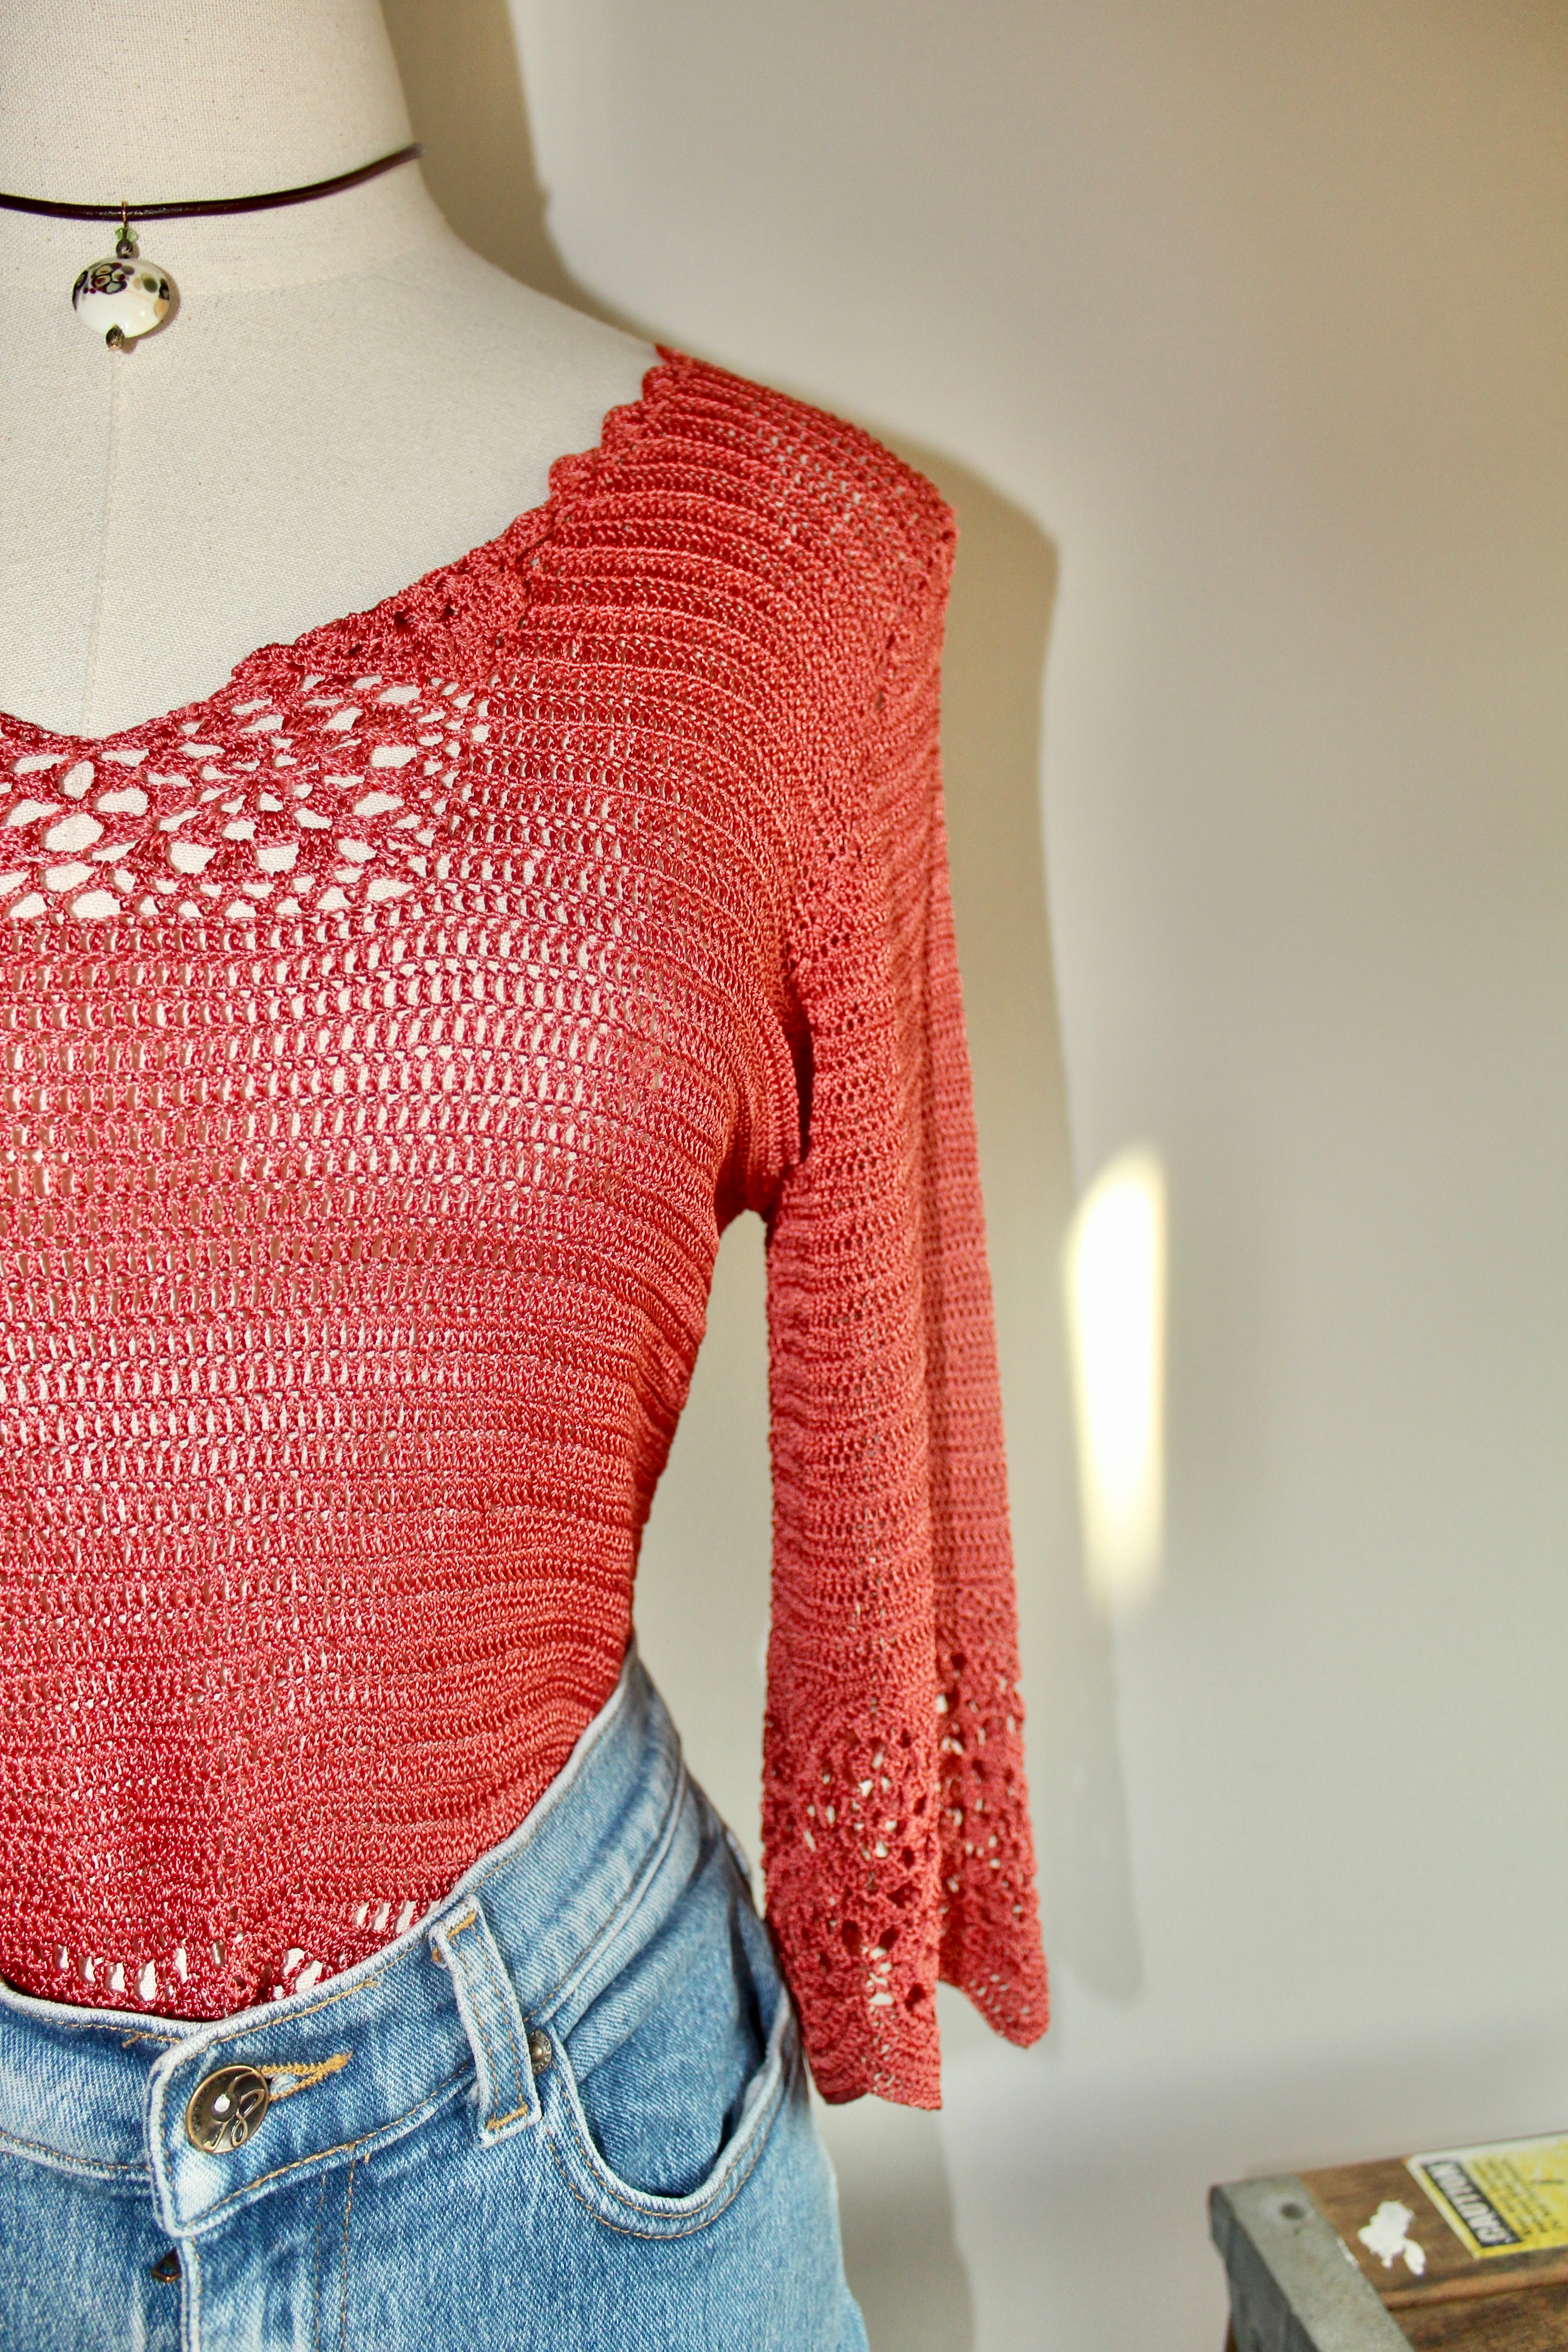 Vintage 90s Dainty Coral Knit Top (M)